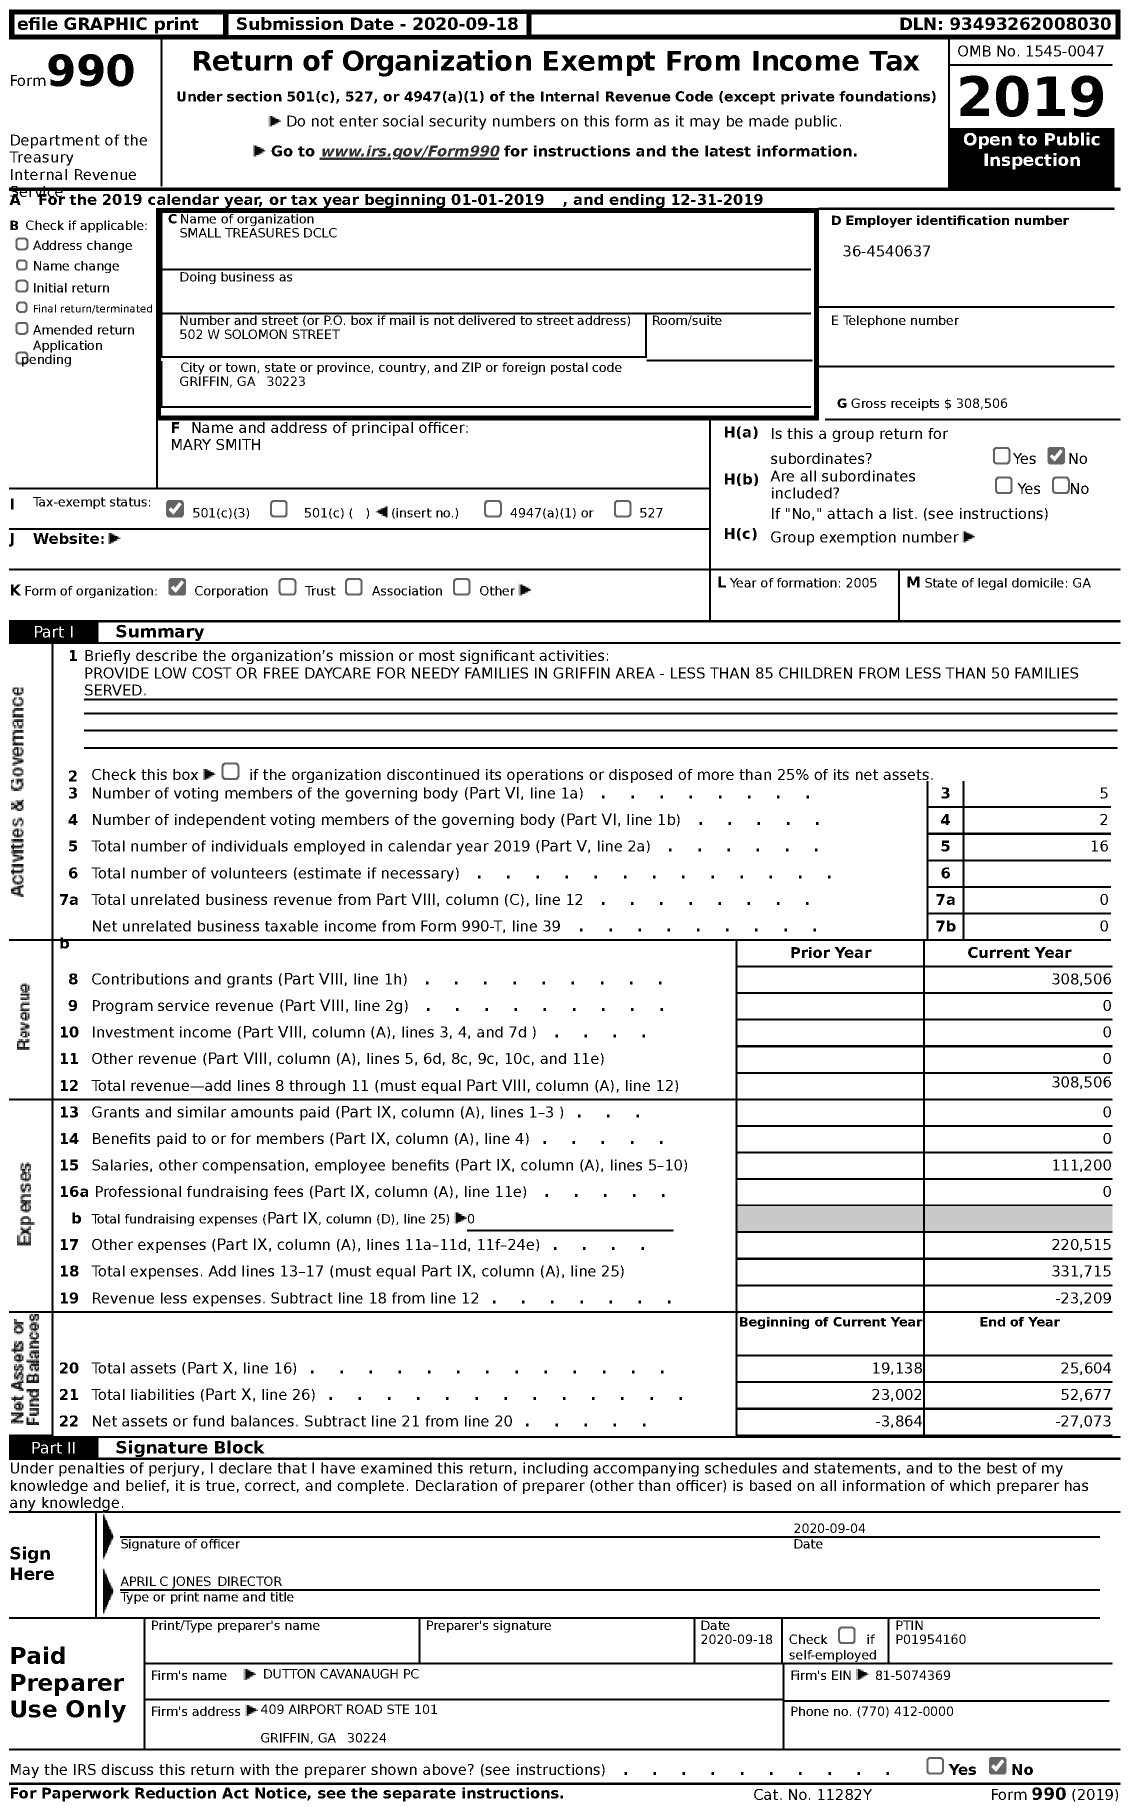 Image of first page of 2019 Form 990 for Small Treasures DCLC